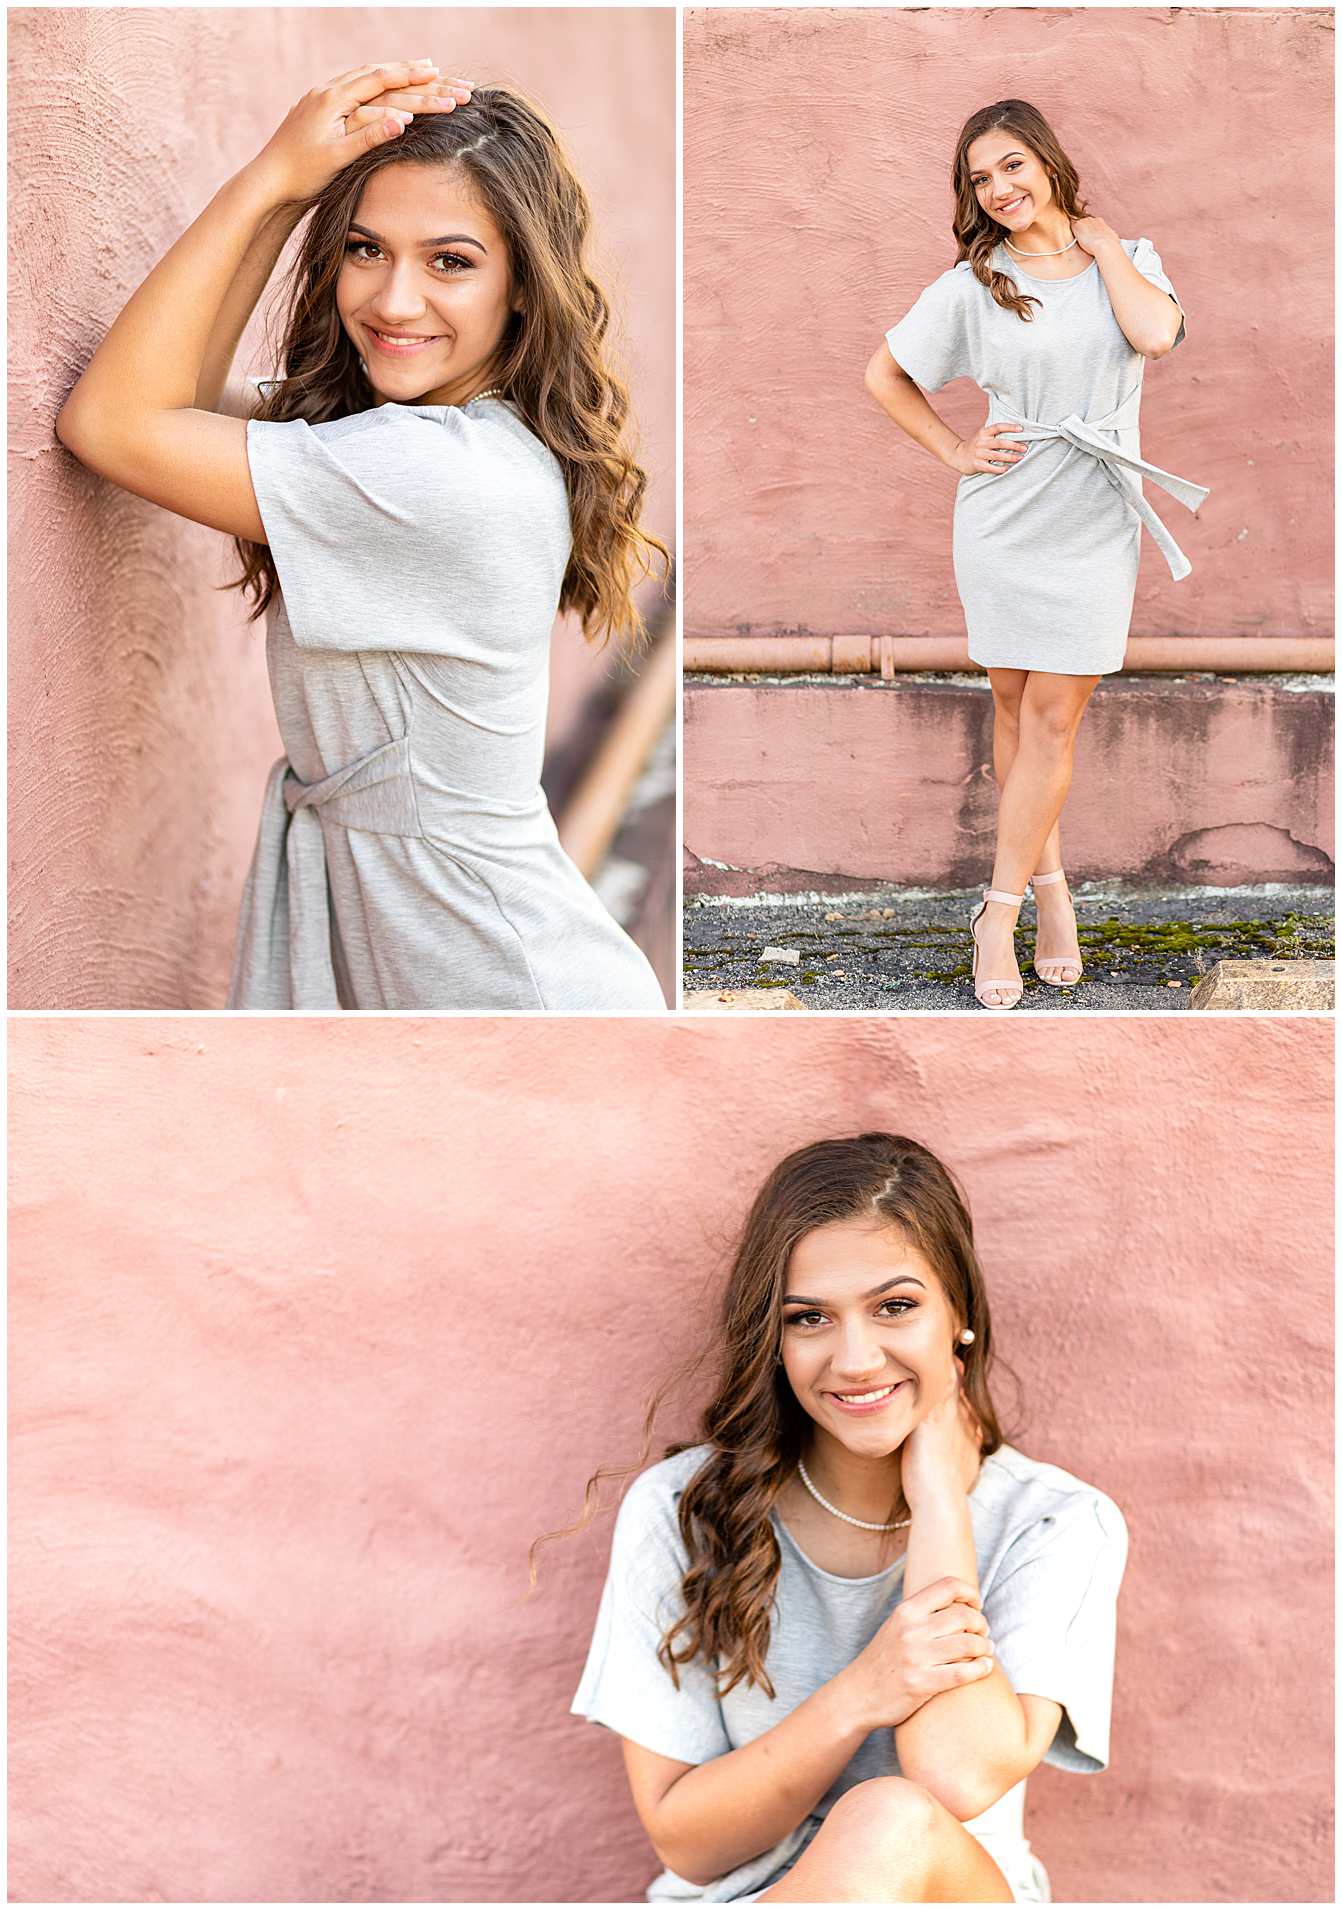 Spring Senior Photos in Urban Downtown Setting, Senior Pictures by Pink Wall in Illinois